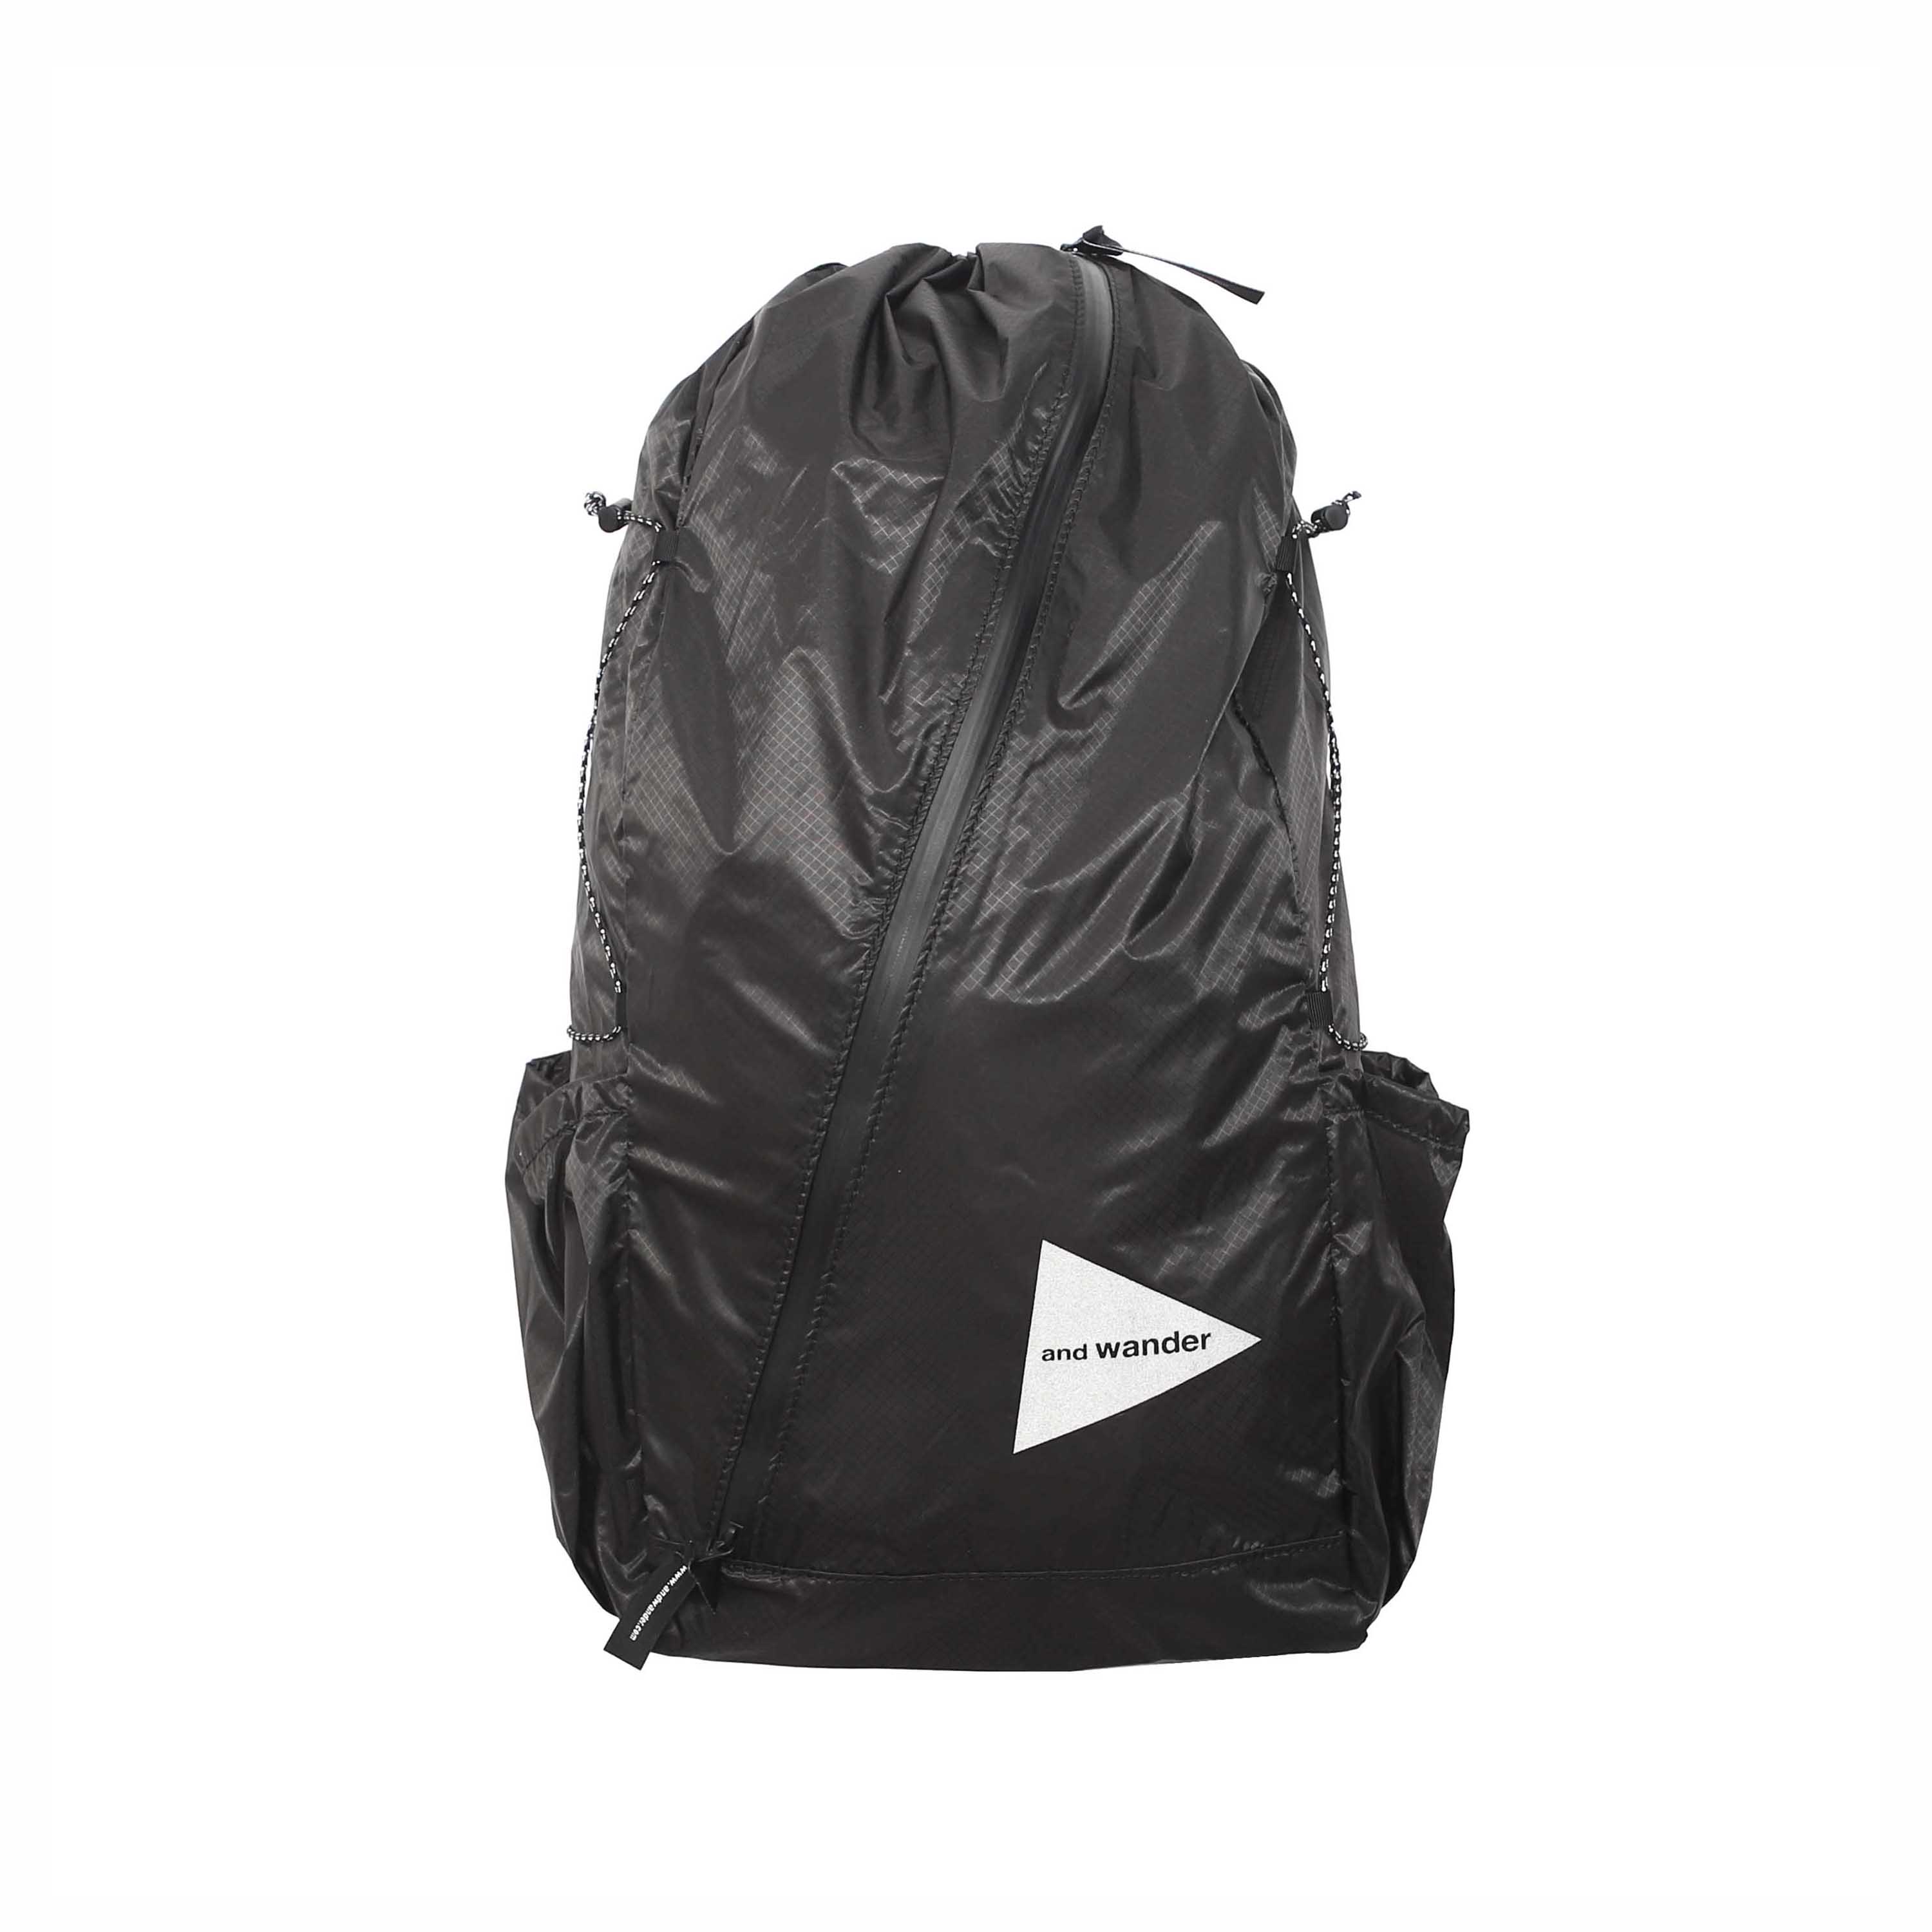 SIL DAYPACK - CHARCOAL